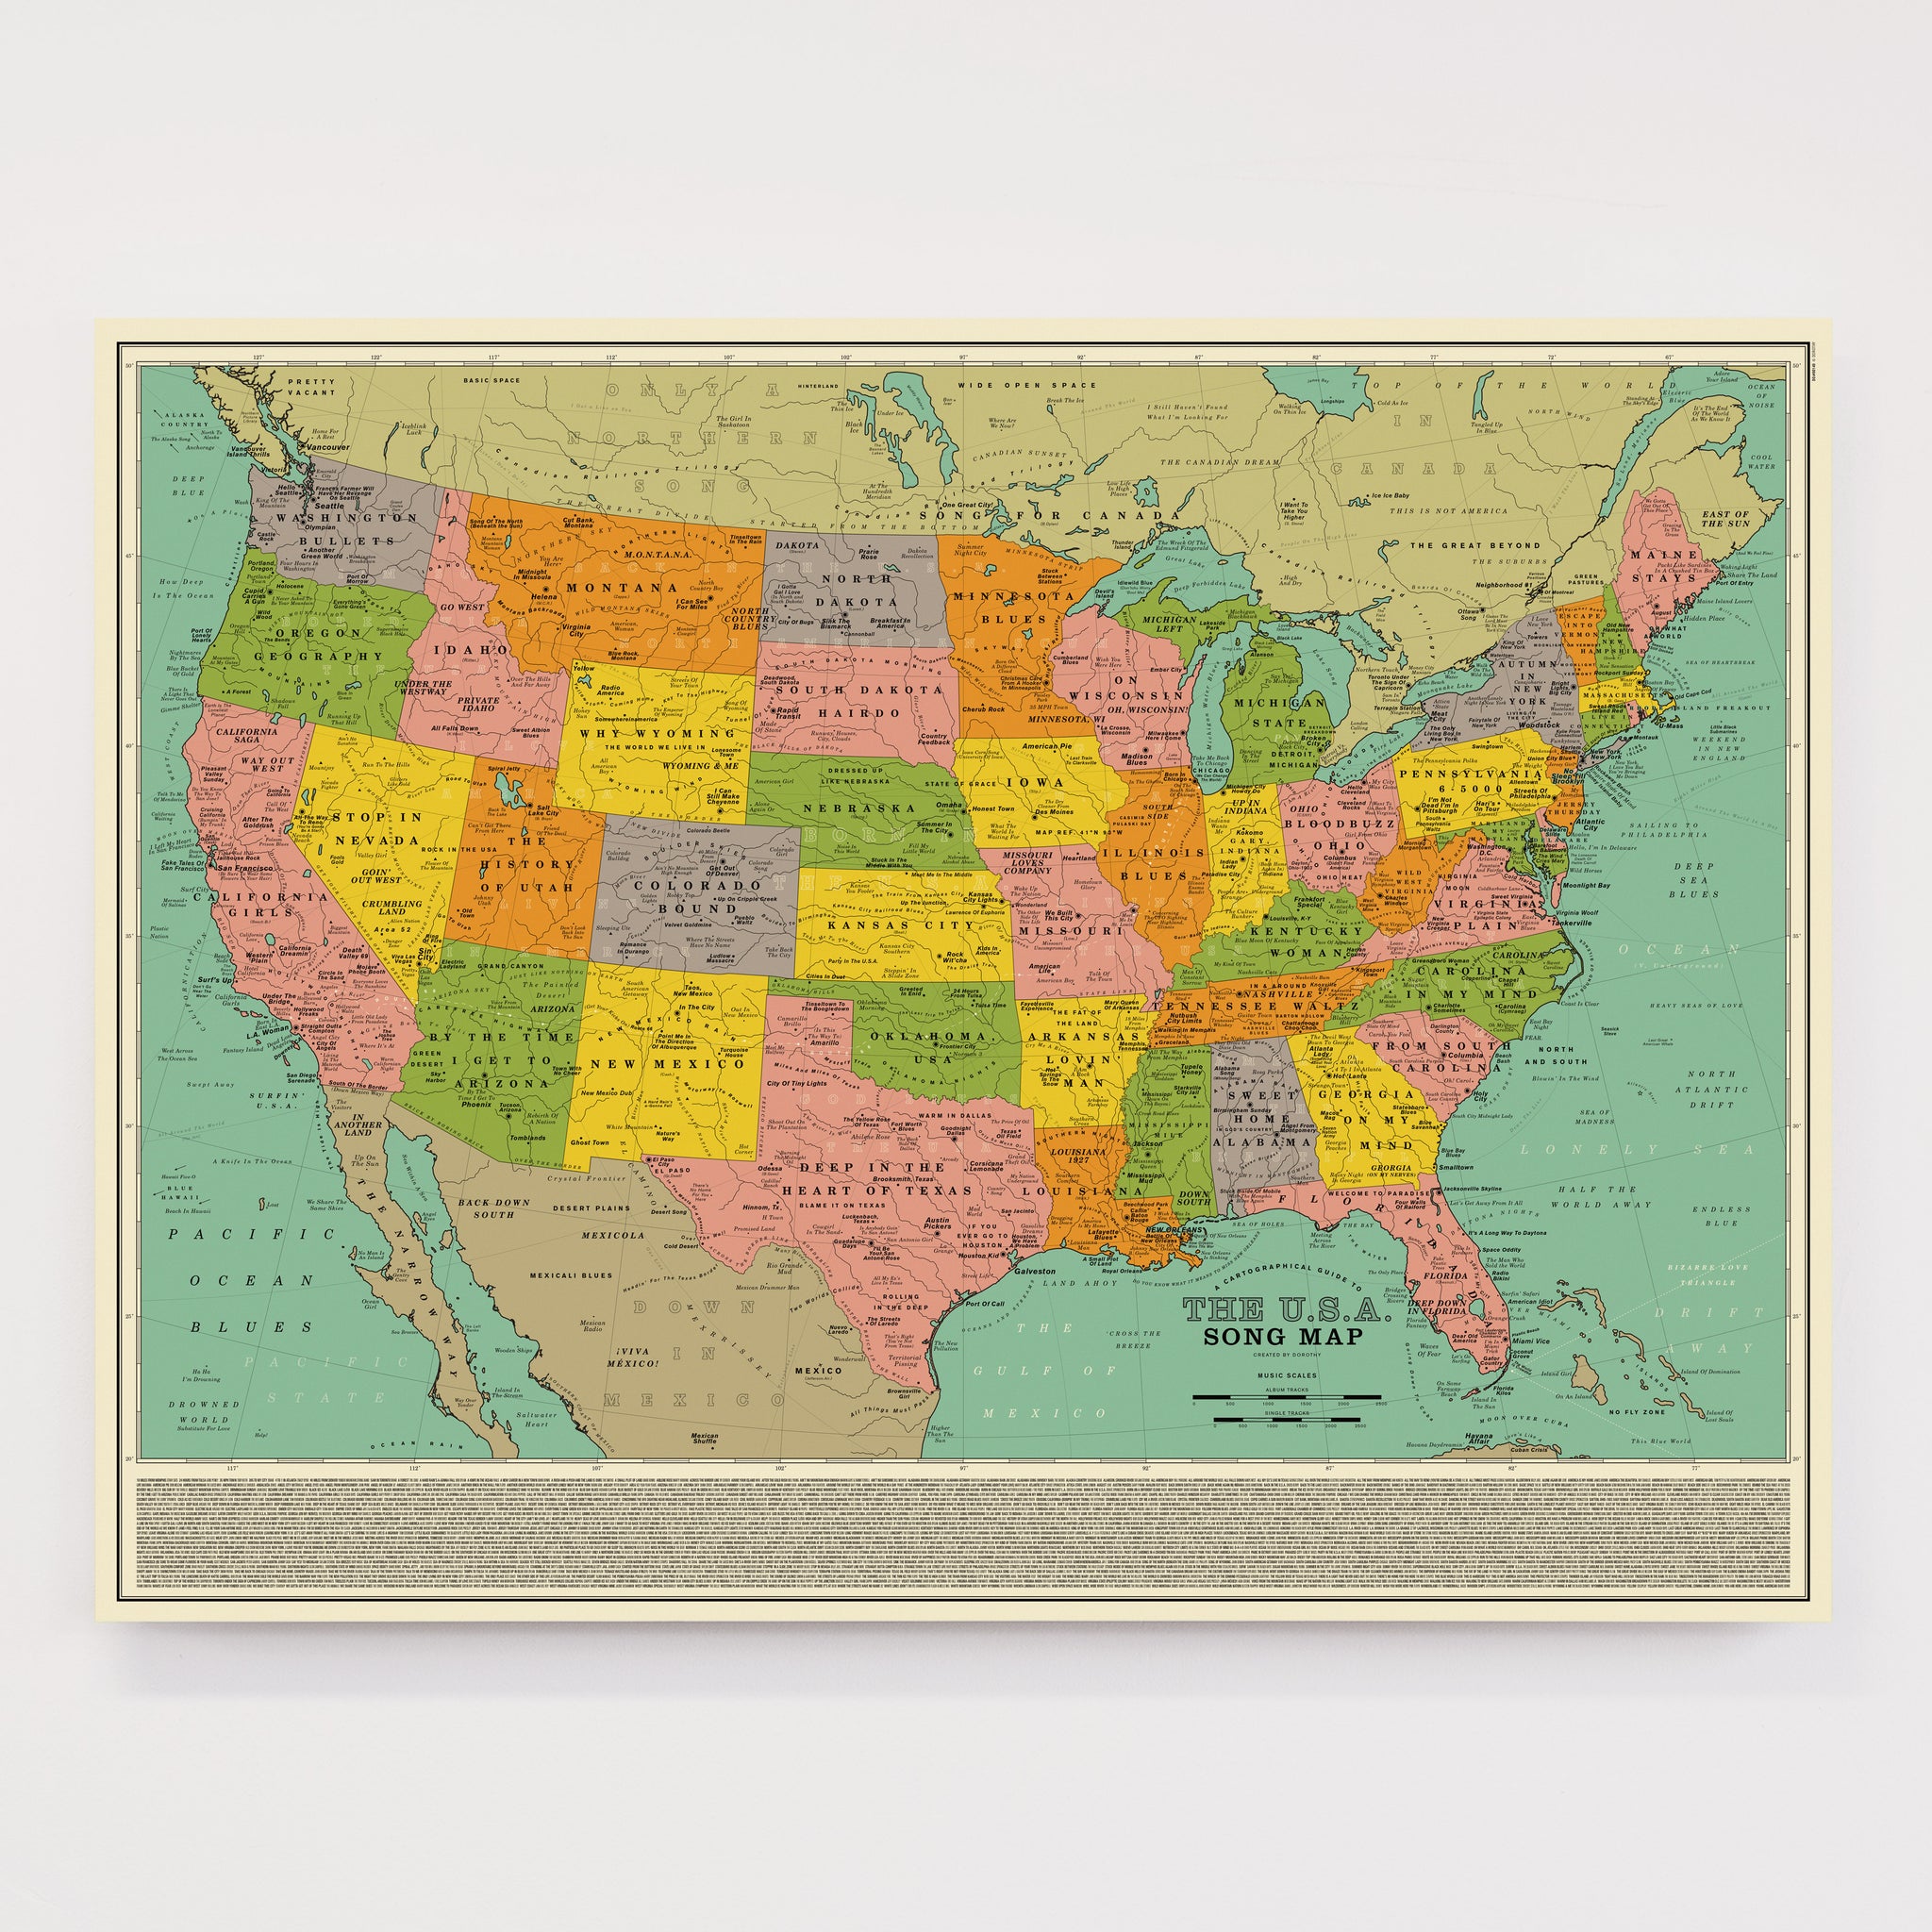 U S A Song Map Open Edition – Dorothy